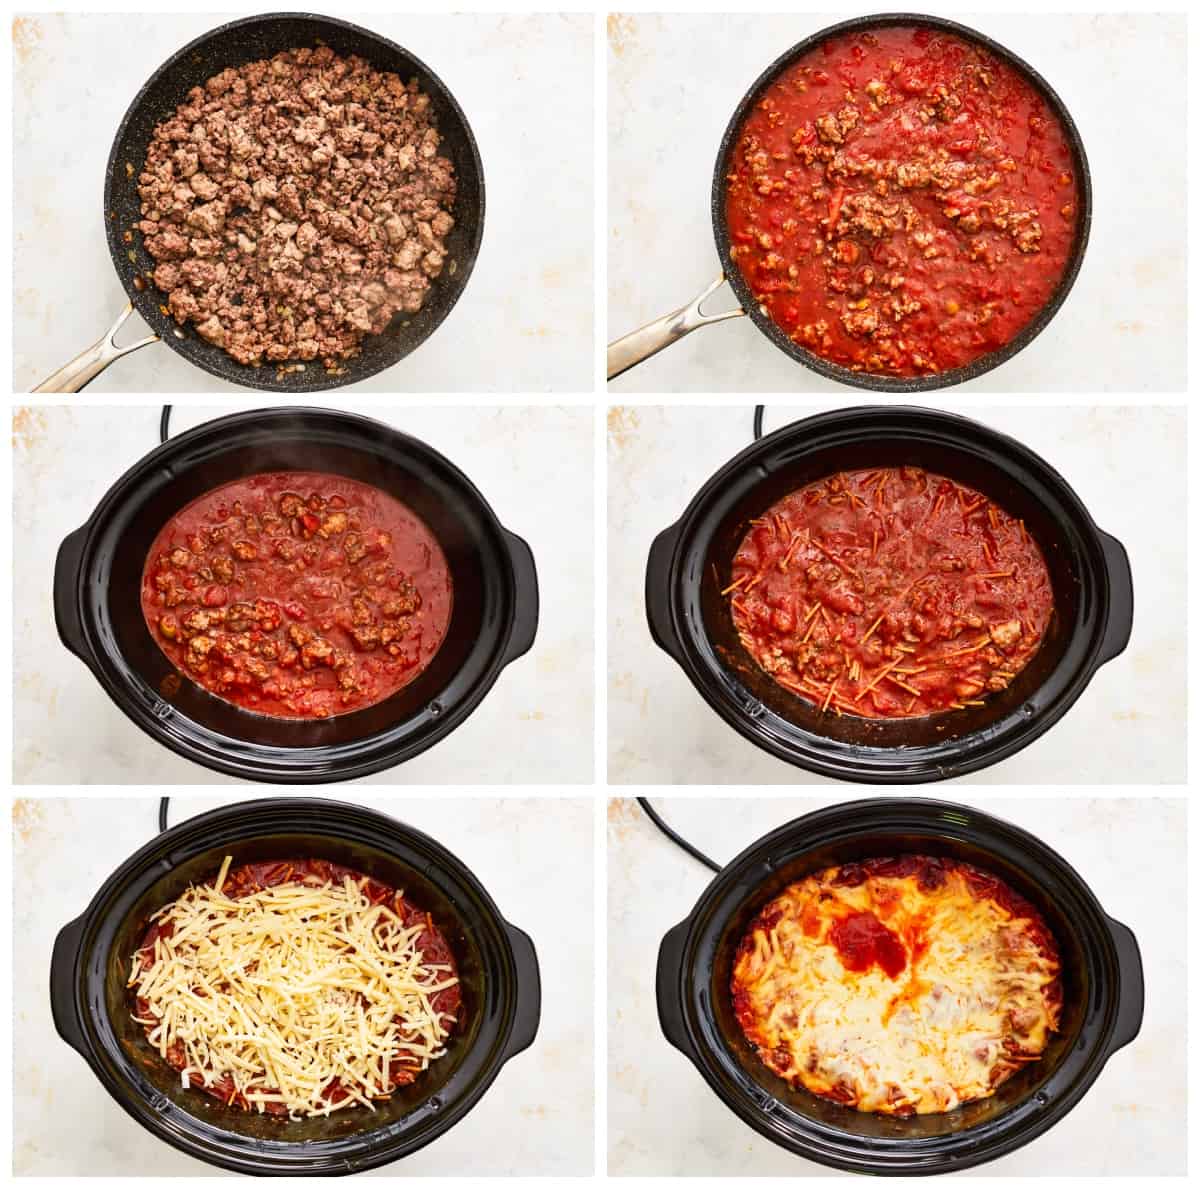 how to make spaghetti in a crock pot step by step photo instructions 